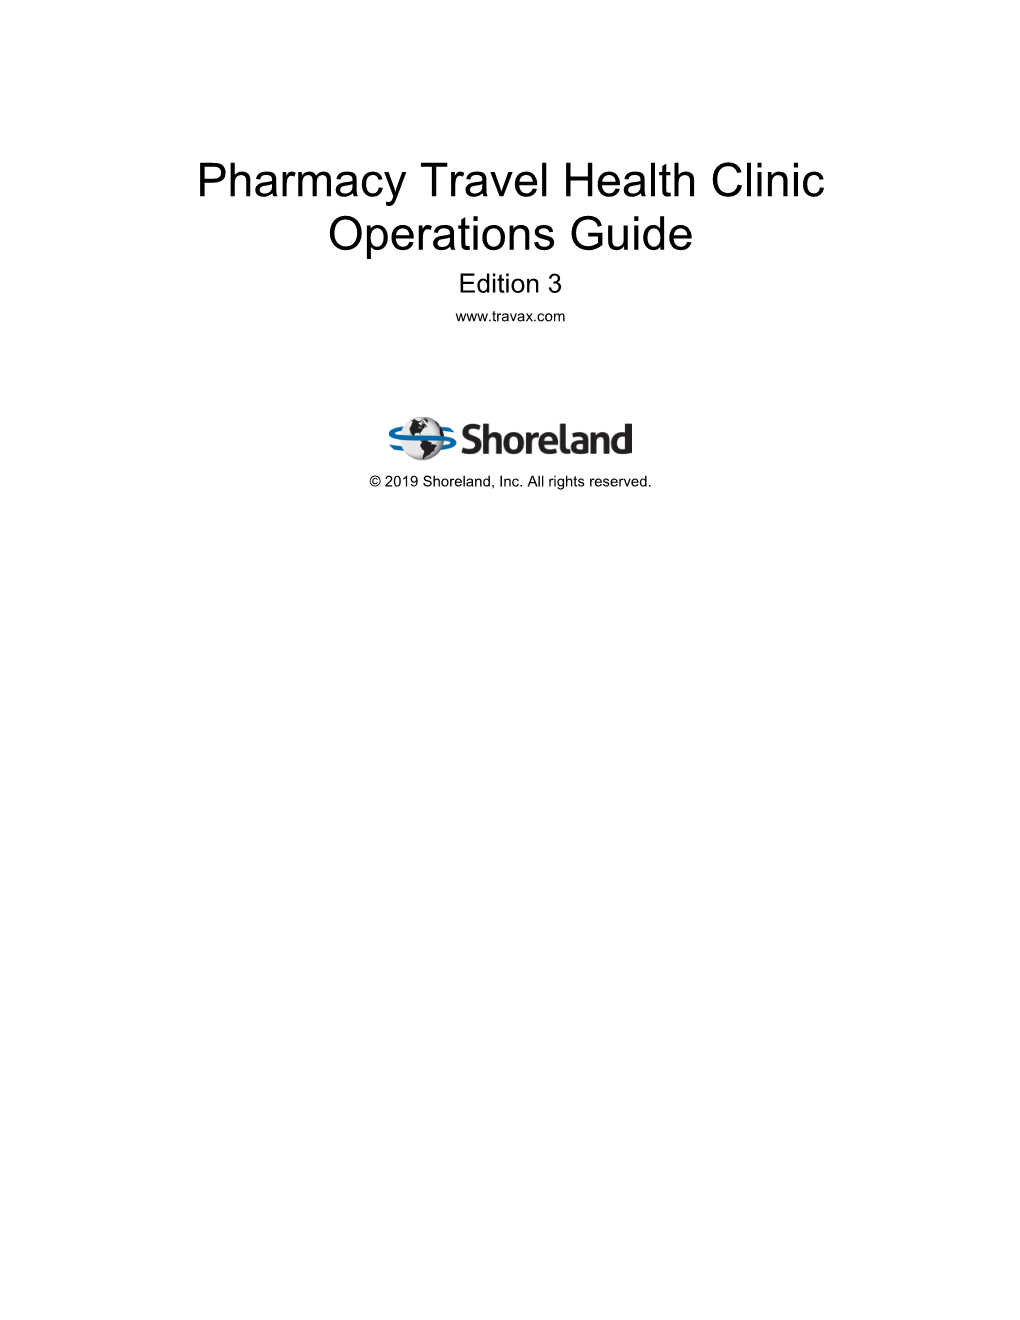 Access the Pharmacy Travel Health Clinic Operations Guide